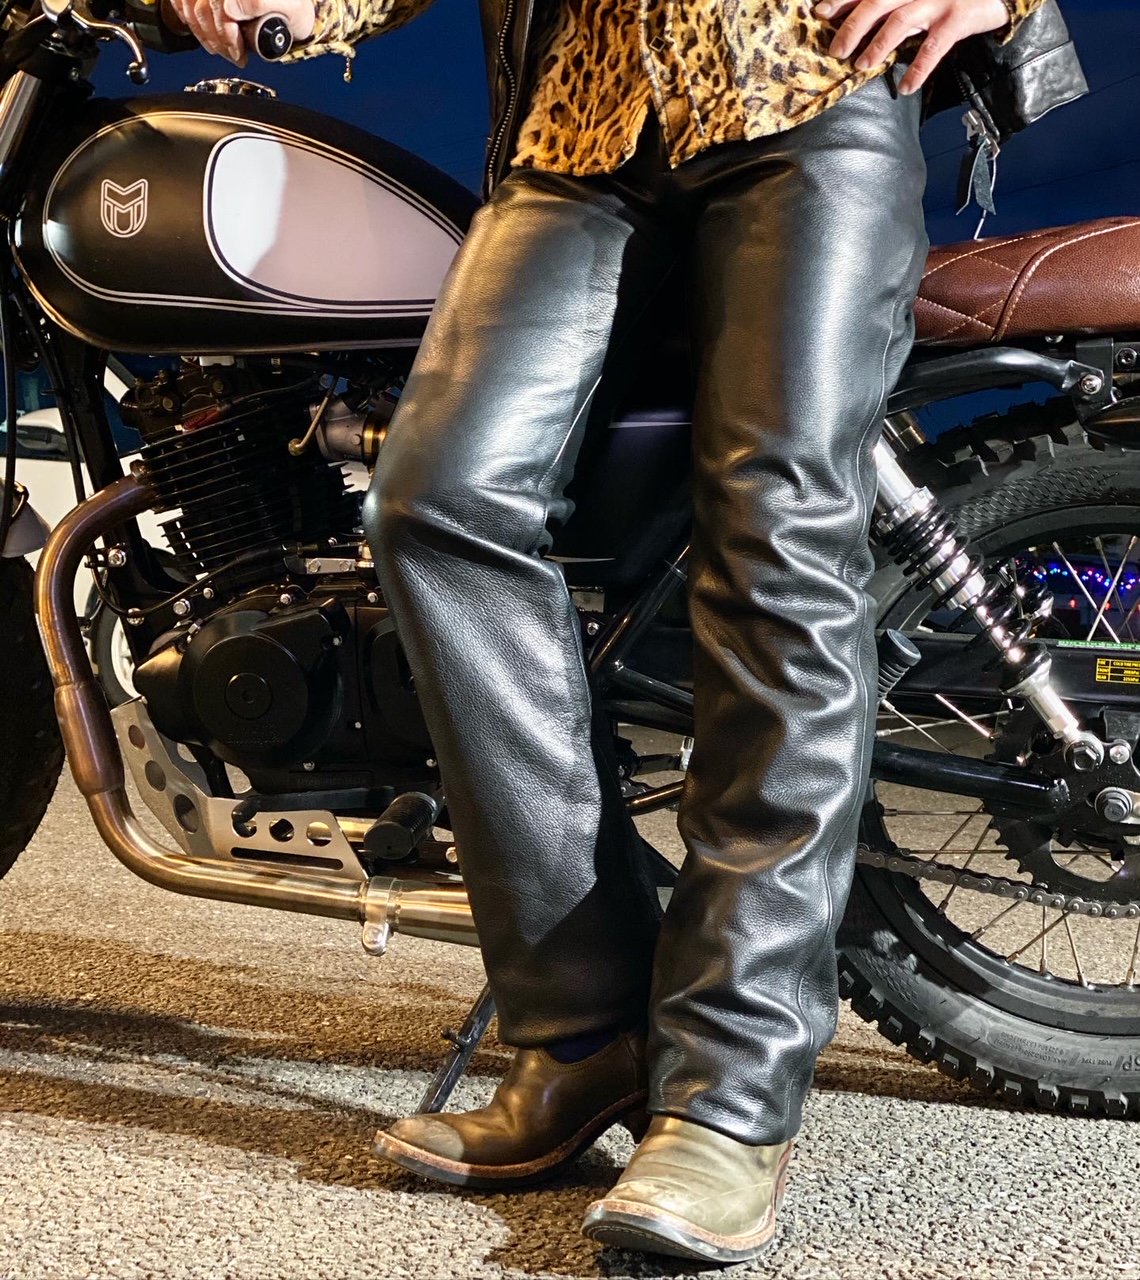 Y'2 LEATHER/ワイツーレザー】レザーパンツ/SPｰ02：STEER OIL PANTS ...